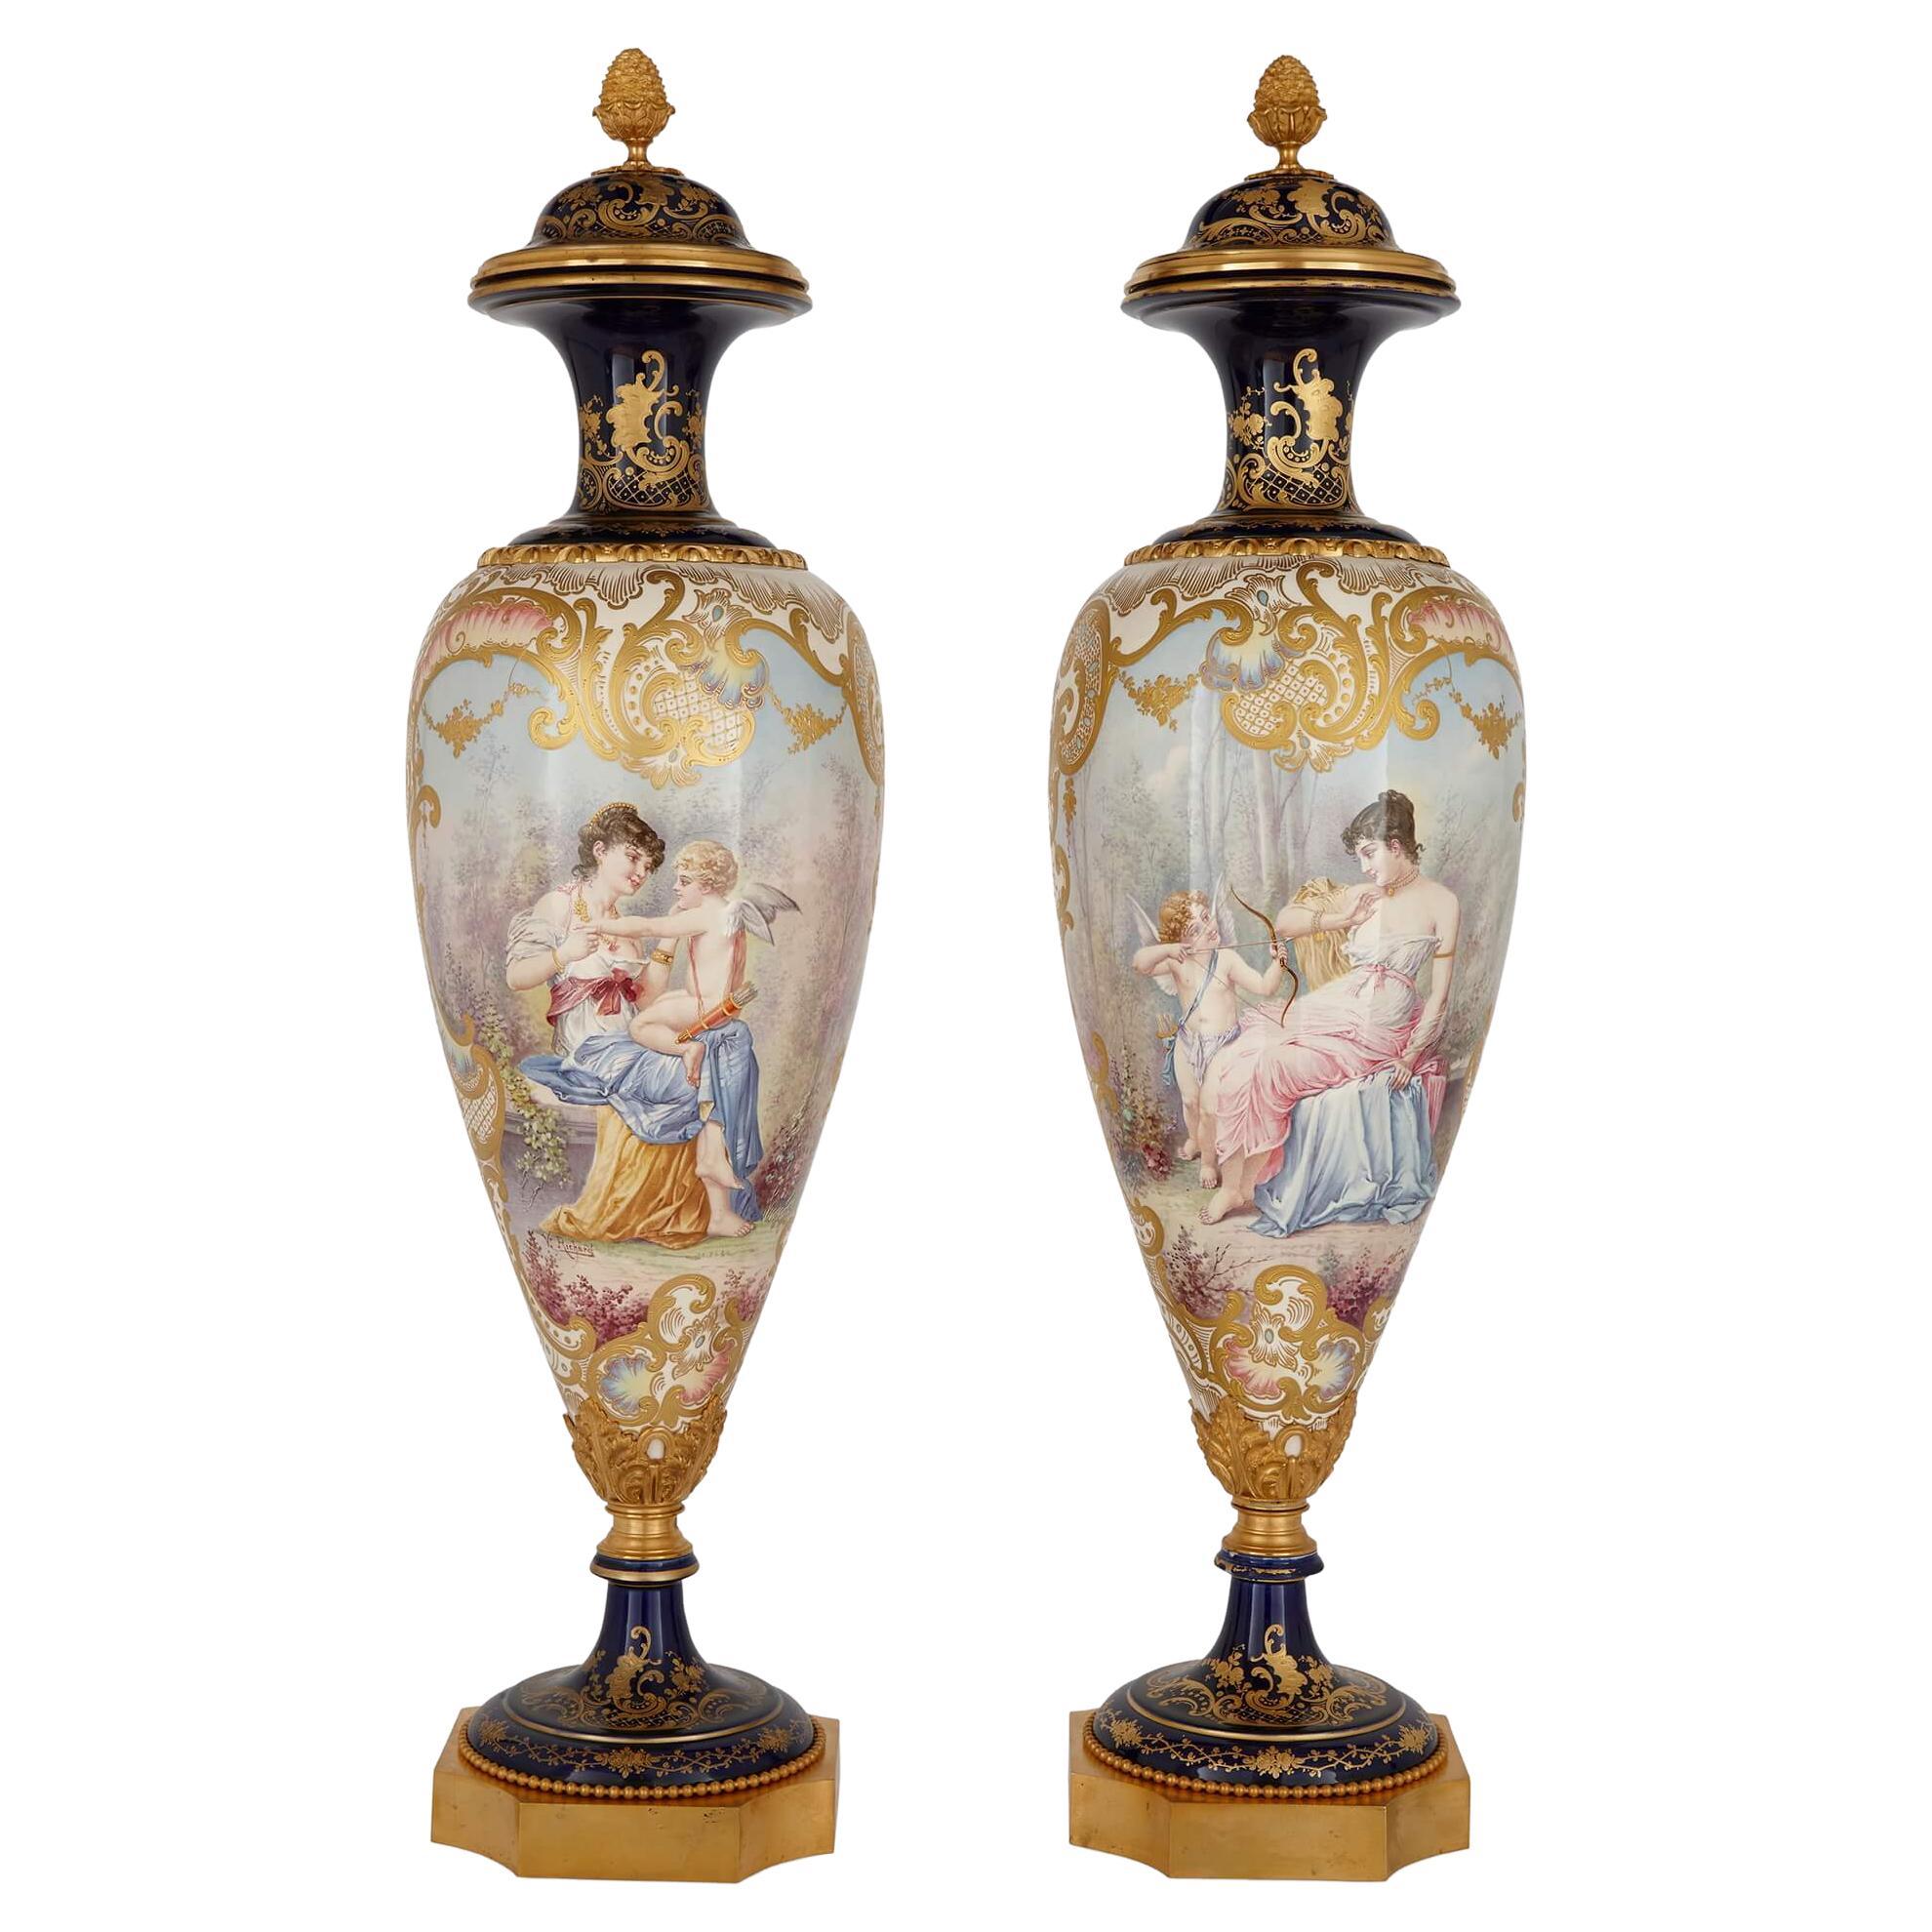 Pair of Large Sèvres Style Gilt Porcelain Mounted Vases